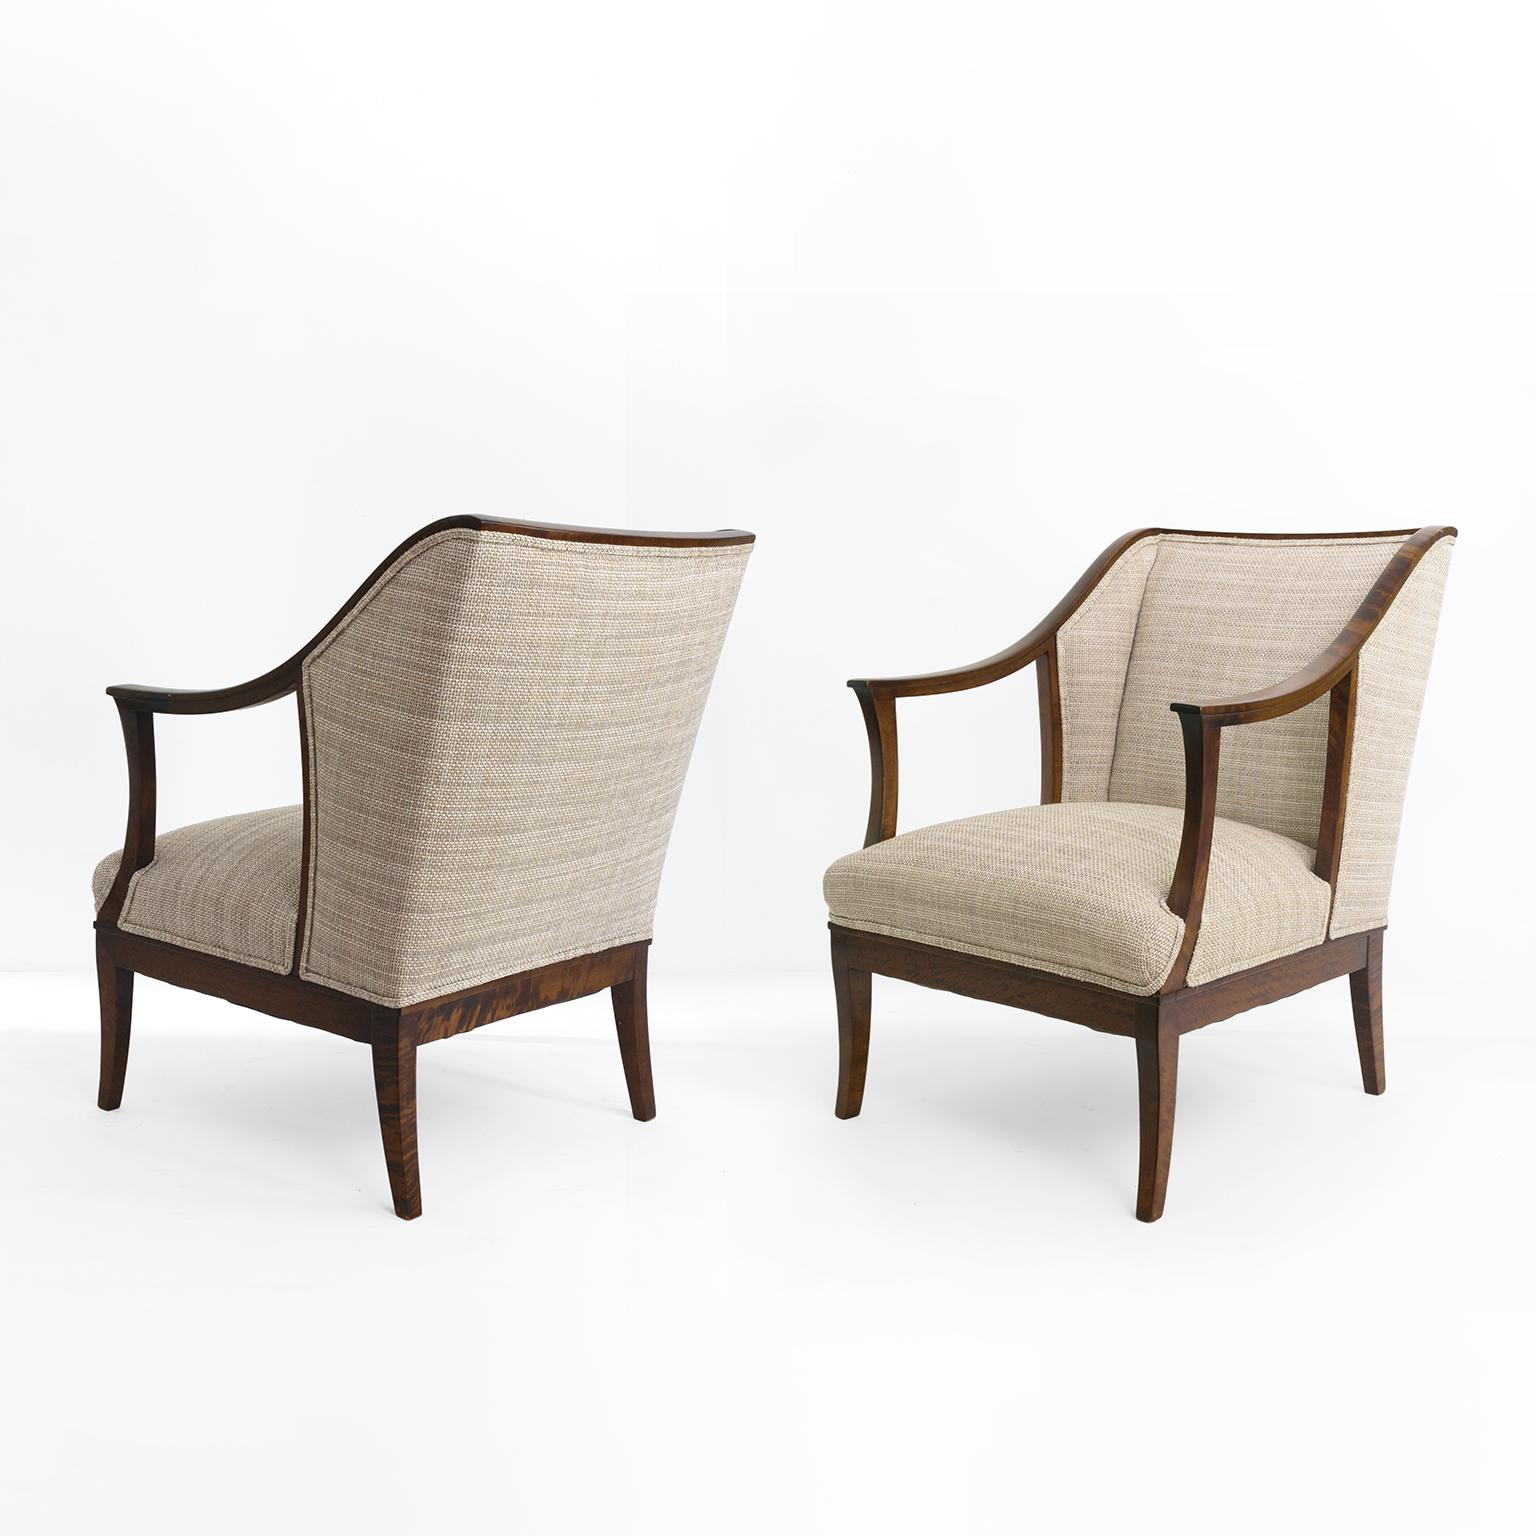 Pair of SMF Bodafors. made Swedish armchairs in stained solid birch wood. The chairs’ frames are constituted from a variety of gentle arched curves. Fully restored the chairs have been newly upholstered and frames newly polished. 

Measures: